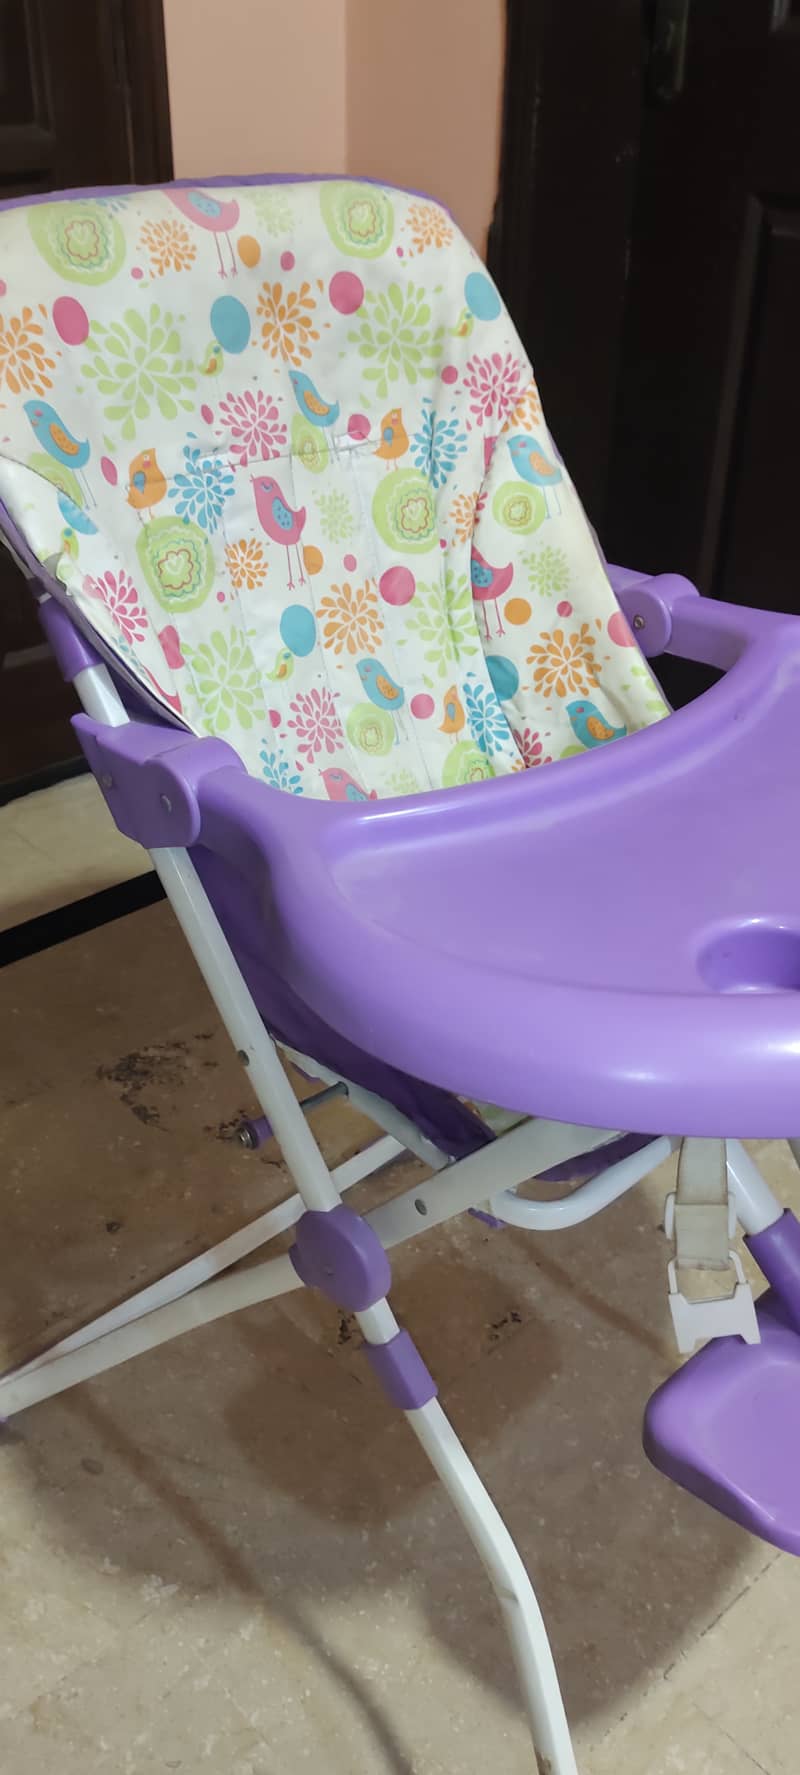 BABY DINNING CHAIR - (FOLDABLE) GOOD CONDITION 2